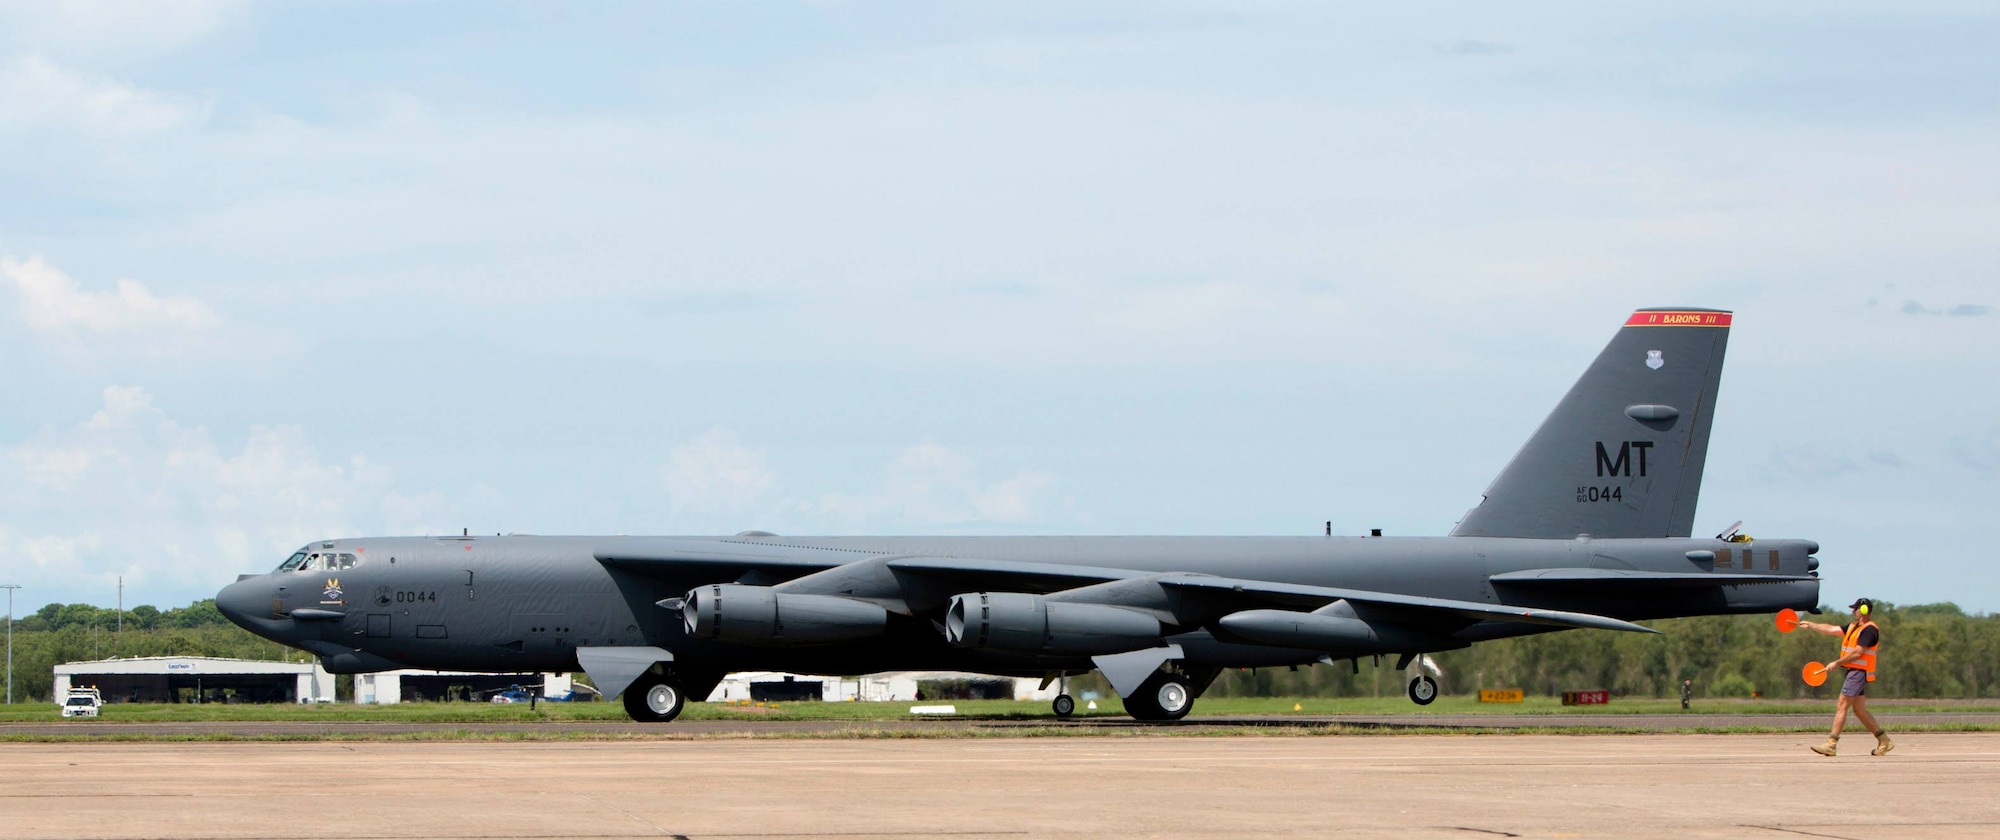 A U.S. Air Force B-52 Stratofortress stationed at Anderson Air Force Base, Guam, landed at Royal Australian Air Force (RAAF) Base Darwin on Monday 8 December 2014, as part of U.S. Pacific Command and U.S. Air Force rotational bomber presence in the Pacific. These rotations enhance U.S. ability to train, exercise and operate with Australia and other allies and partners across the region, further enabling the U.S. to work together with these nations to respond more quickly to a wide range of challenges, including humanitarian crises and disaster relief, as well as promoting security cooperation efforts across the region. (Royal Australian Air Force Photo/Released)